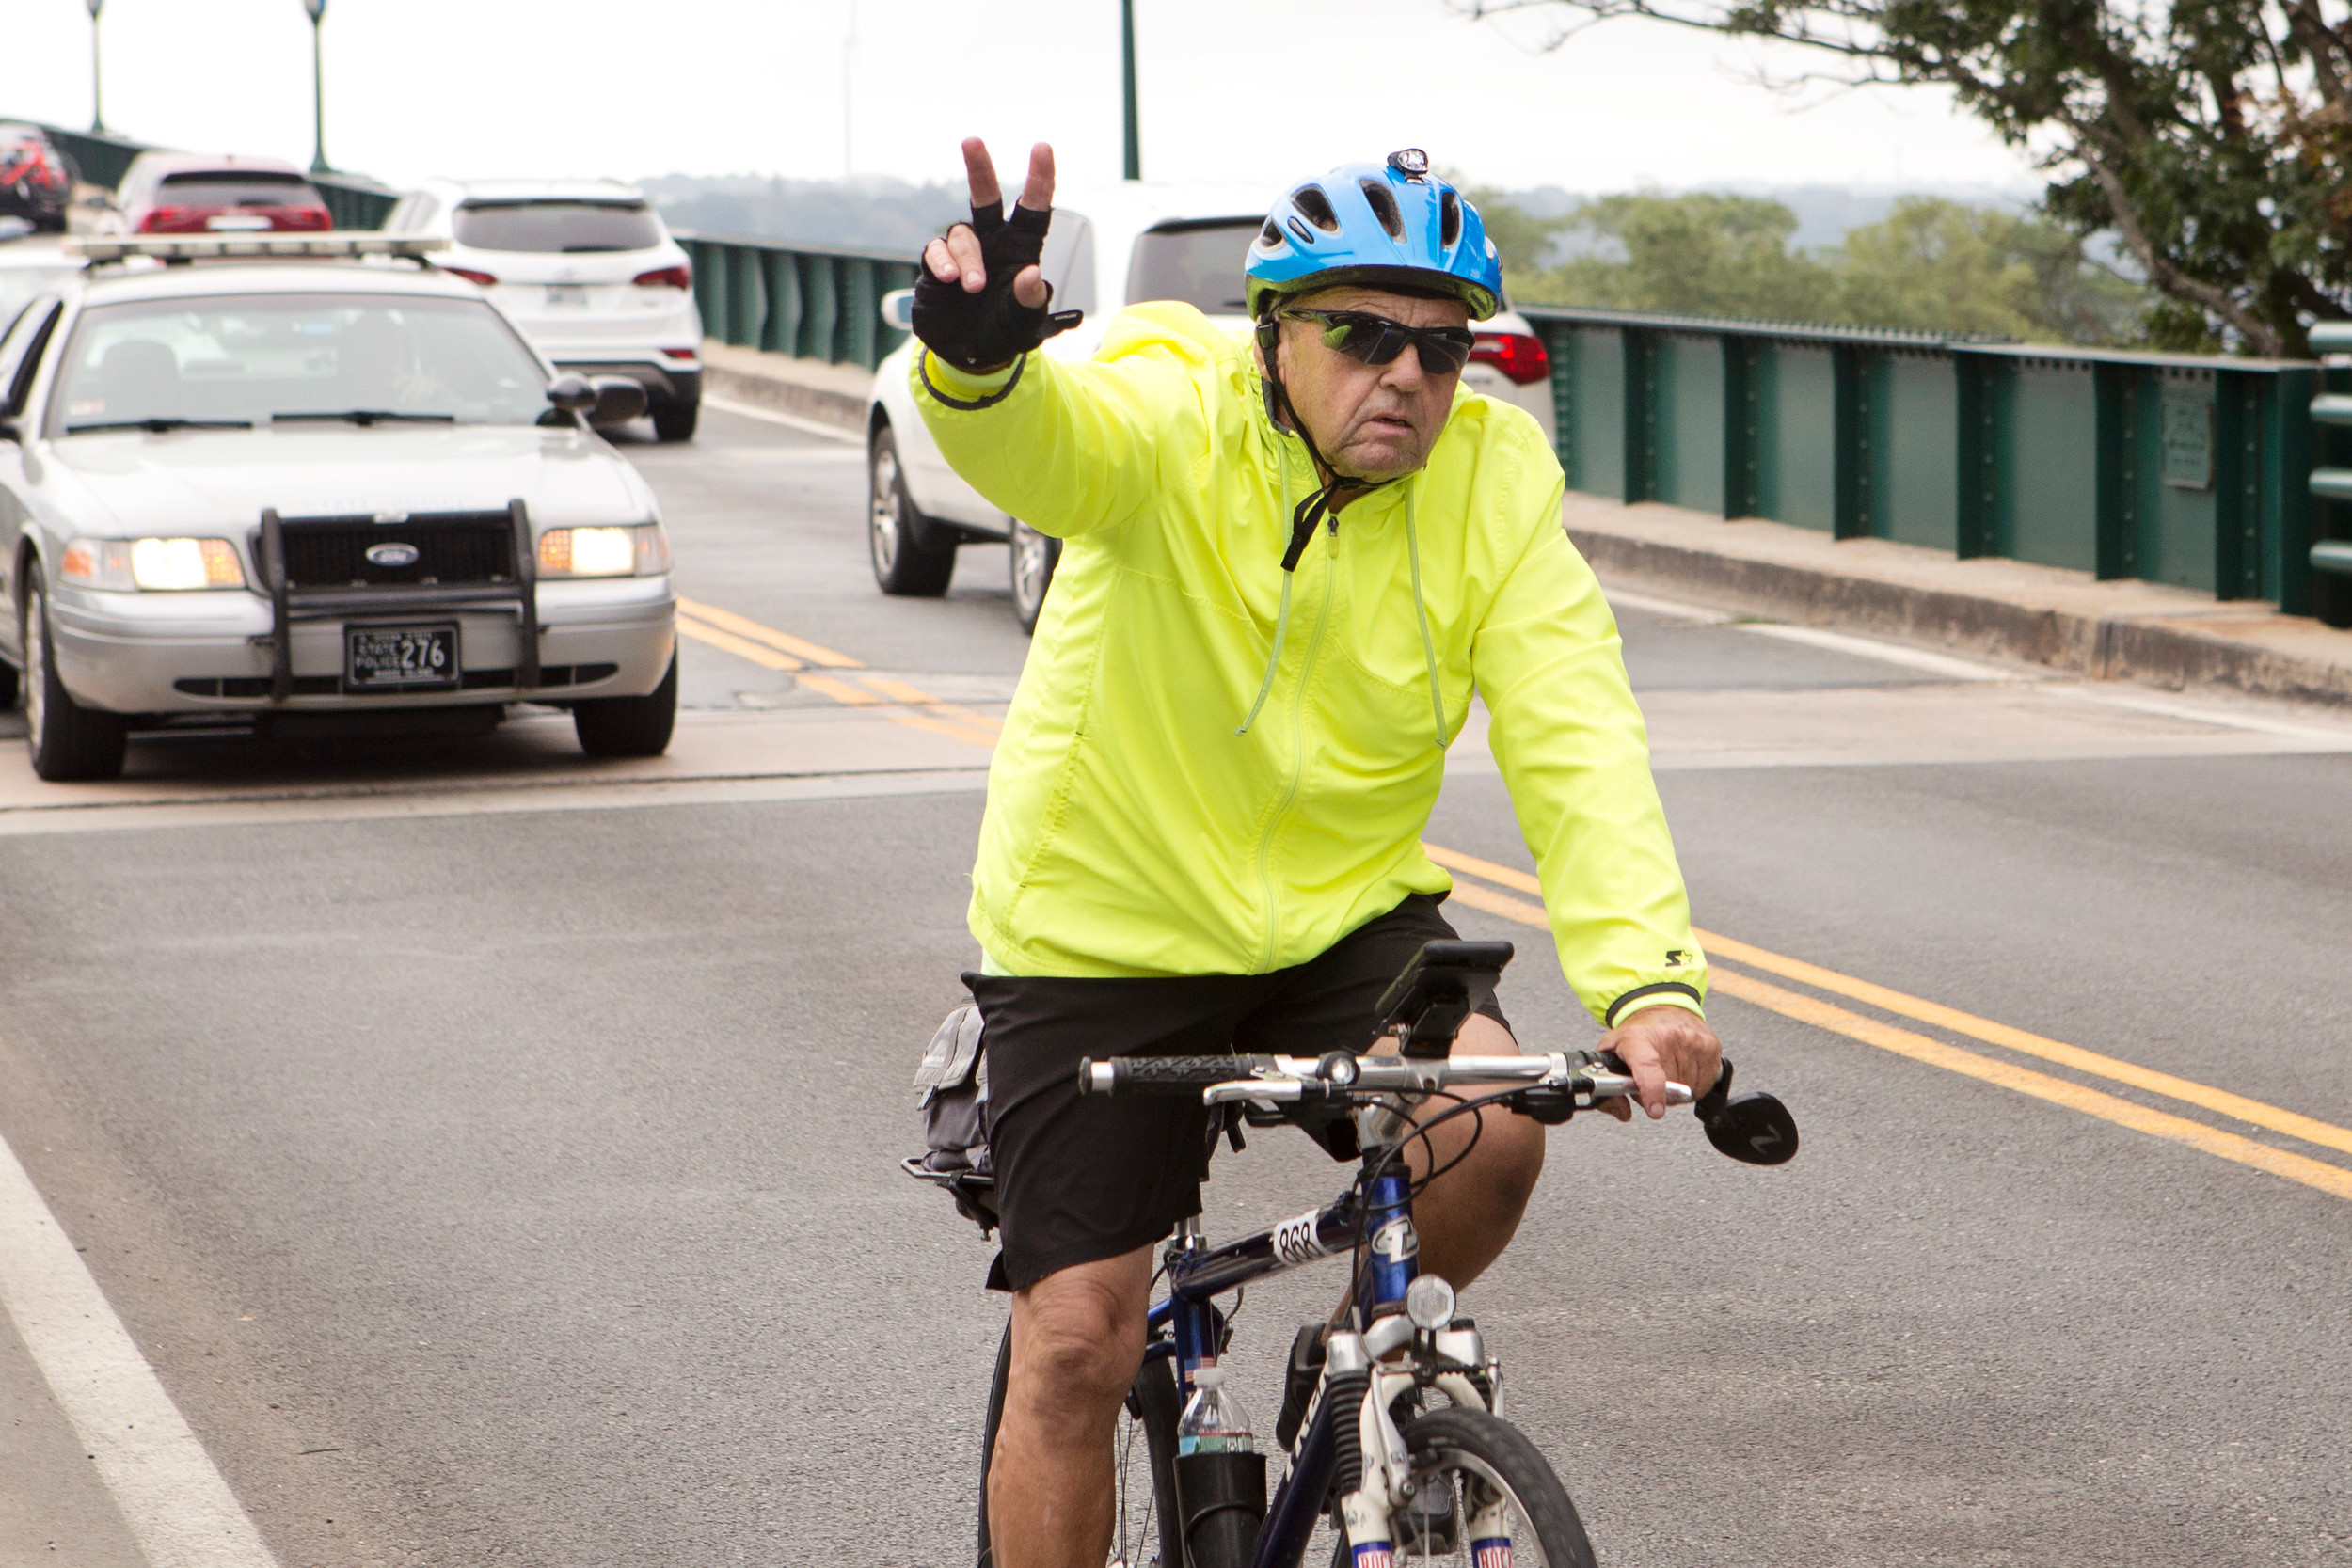 A rider flashes the peace sign as he completes the 4 Bridges Ride on the Bristol side of the Mt. Hope Bridge on Sunday.